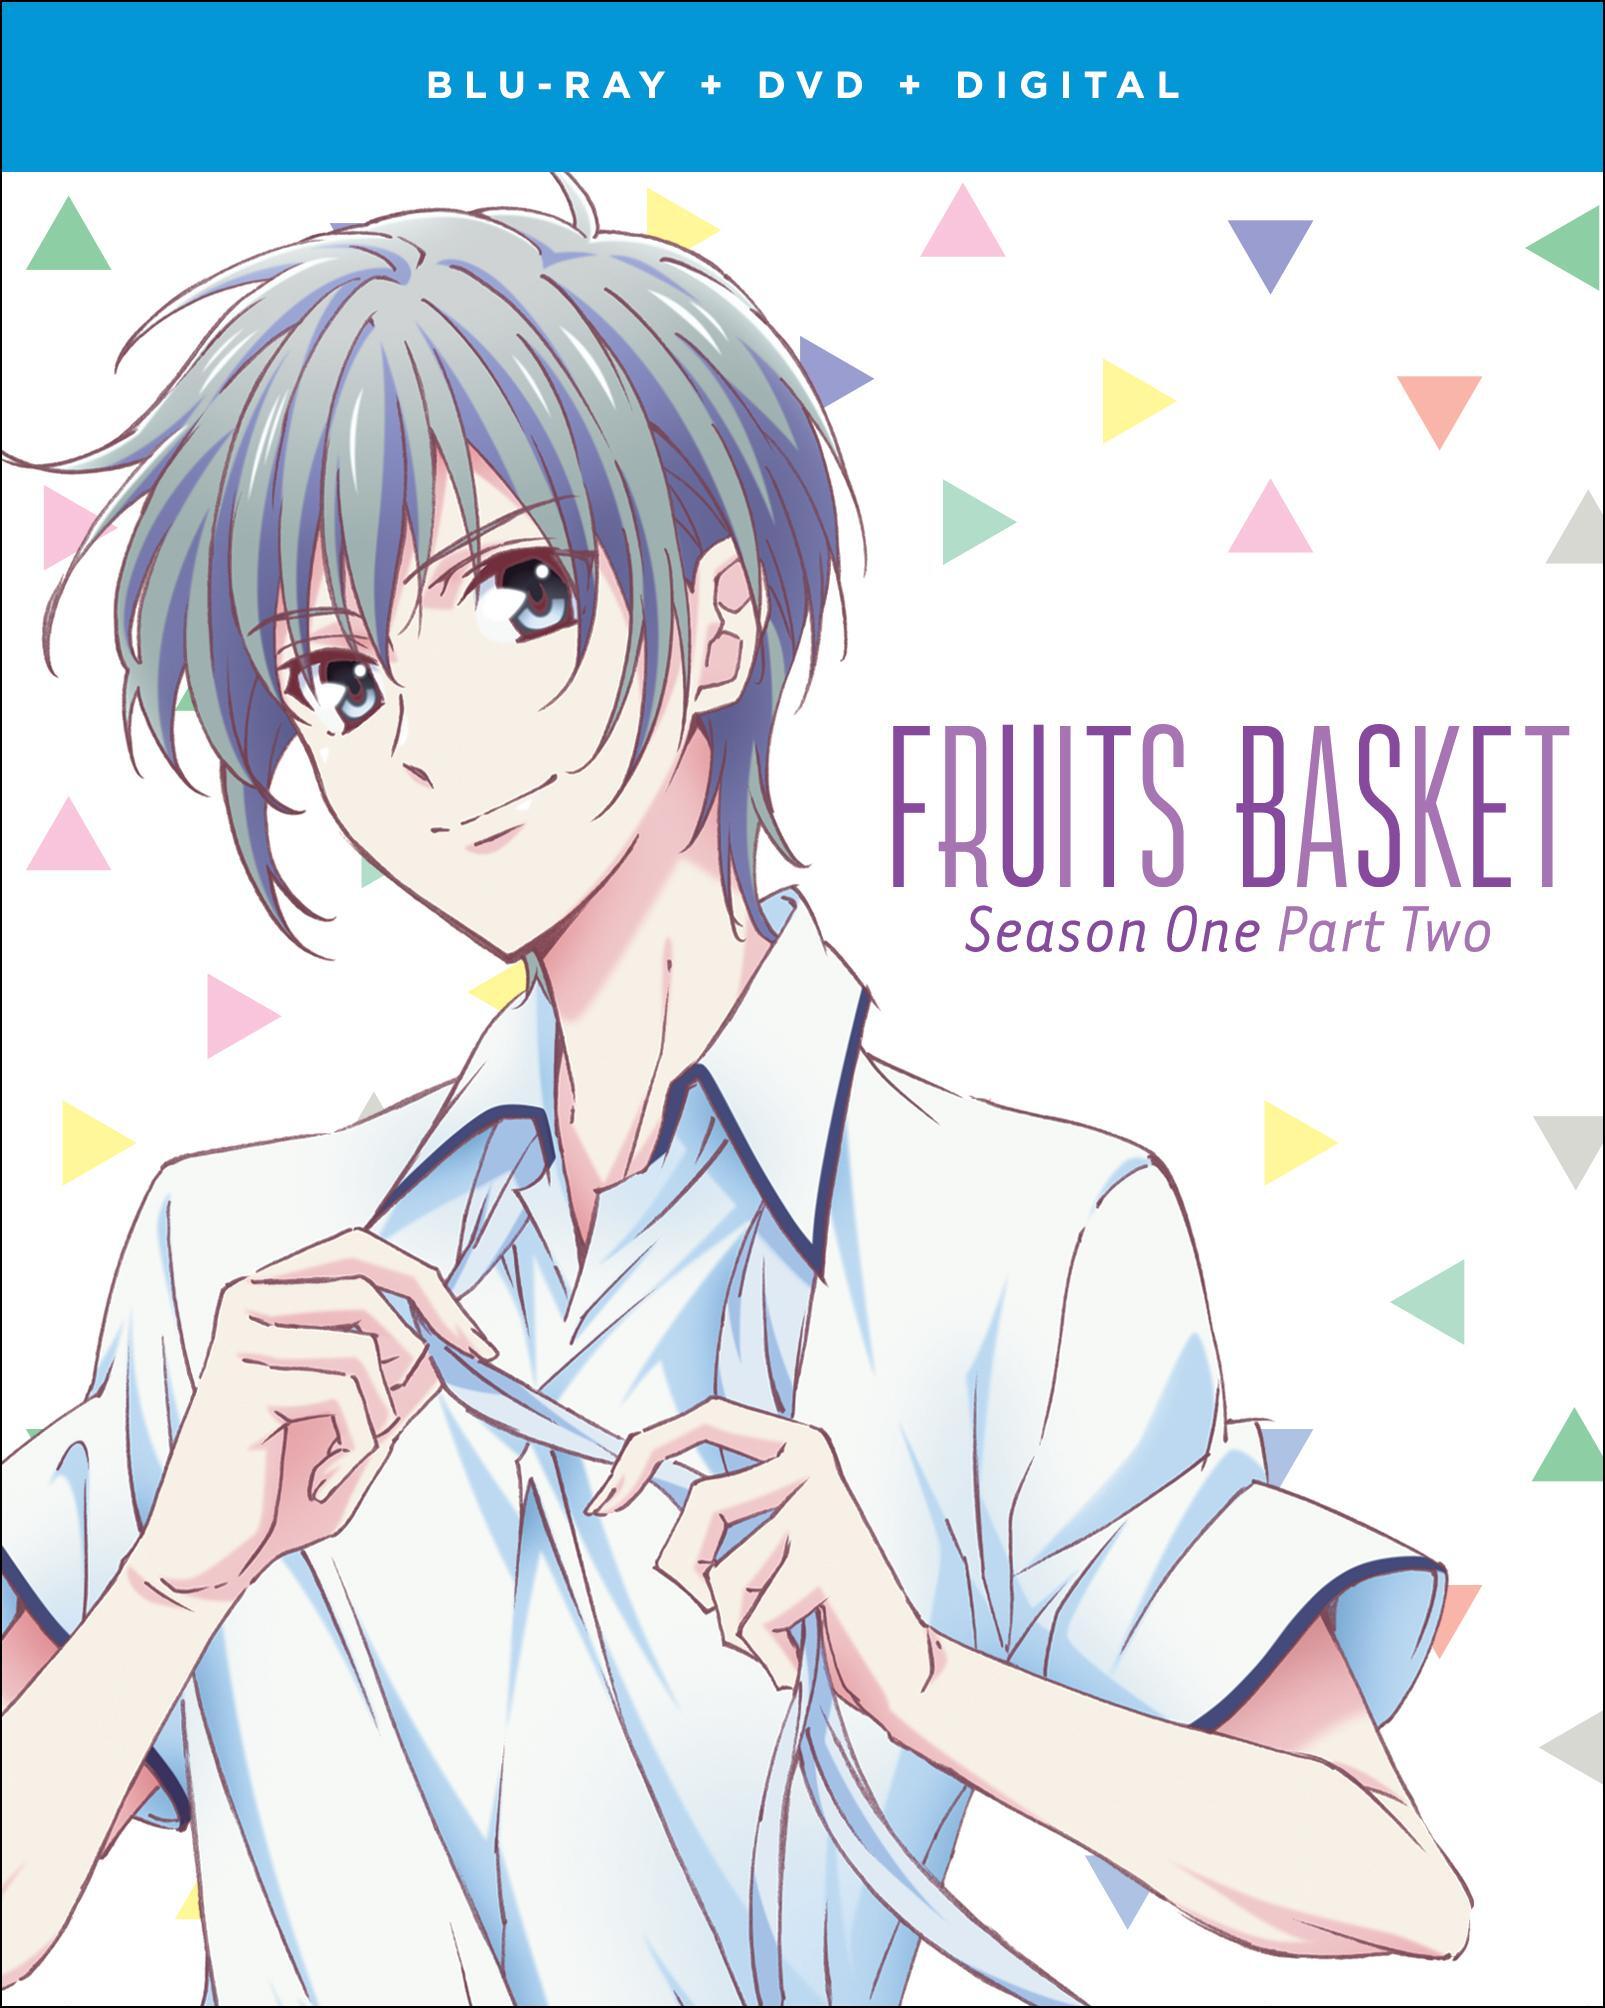 Fruits Basket: Season One, Part Two (with DVD) - Blu-ray [ 2019 ]